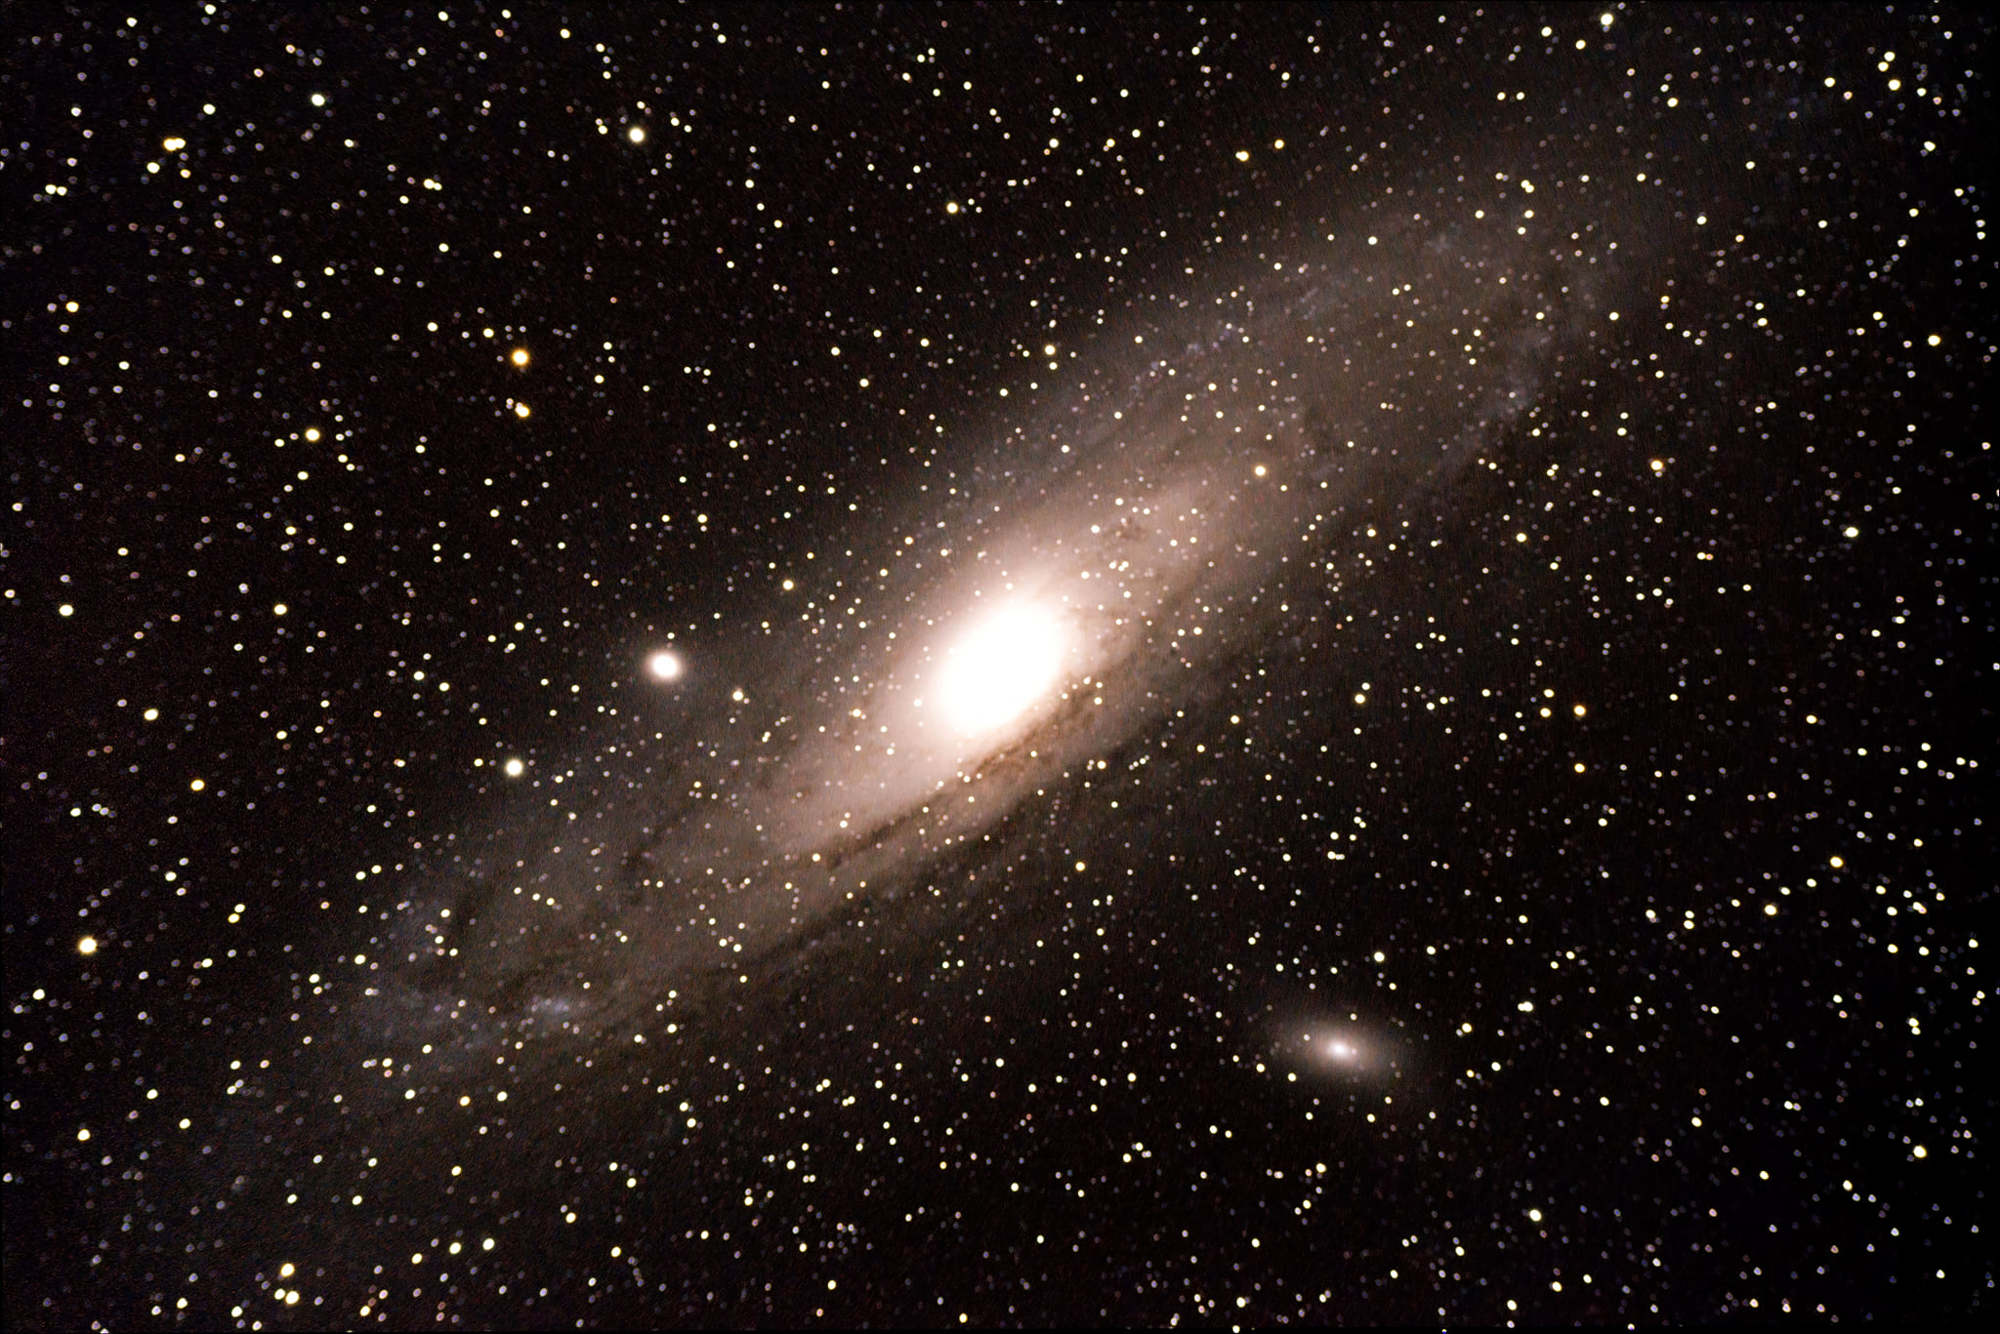 The town of Longboat Key shared Richard Schoepfer’s picture of the Andromeda Galaxy on its Facebook page.